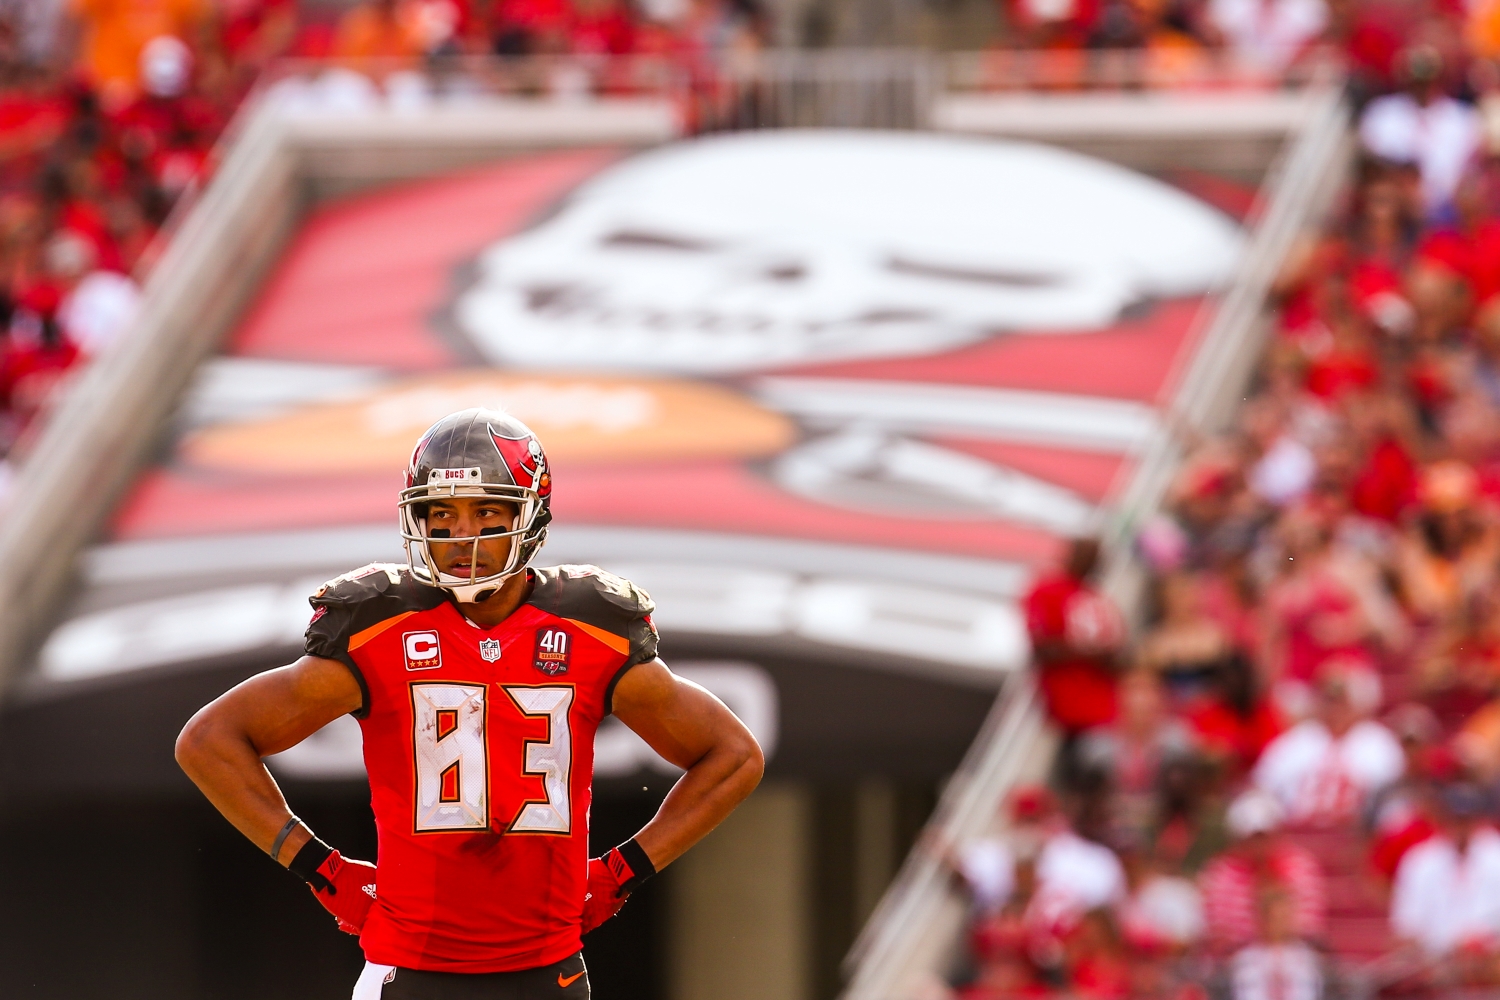 Vincent Jackson of the Tampa Bay Buccaneers looks on during the game against the Atlanta Falcons at Raymond James Stadium on December 6, 2015 in Tampa, Florida.